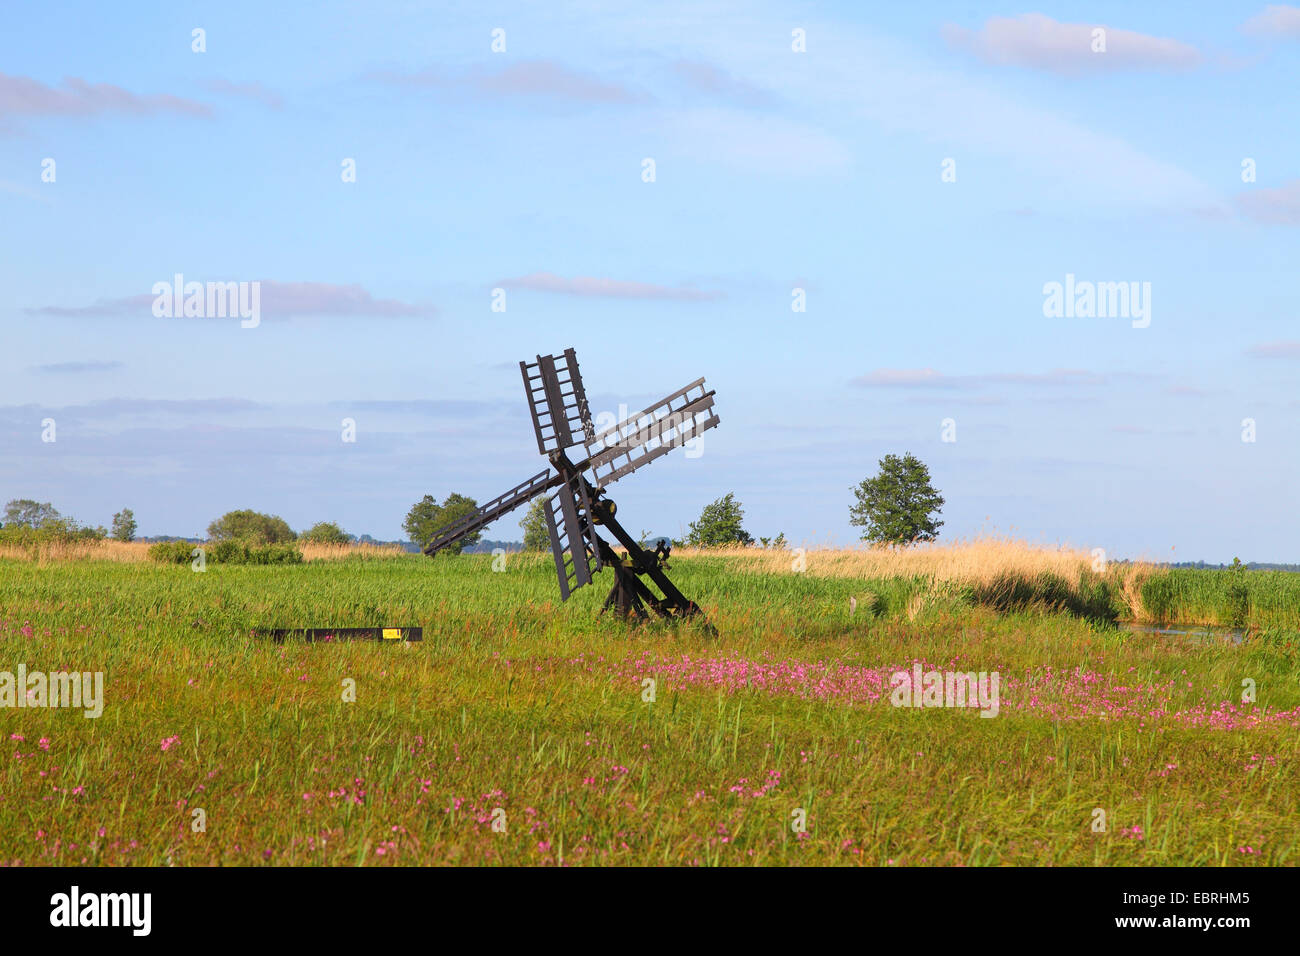 meadow campion, ragged-robin (Lychnis flos-cuculi, Silene flos-cuculi), marsh meadow with flowering meadow campions and a wind-driven pump, Netherlands, Weerribben-Wieden National Park Stock Photo